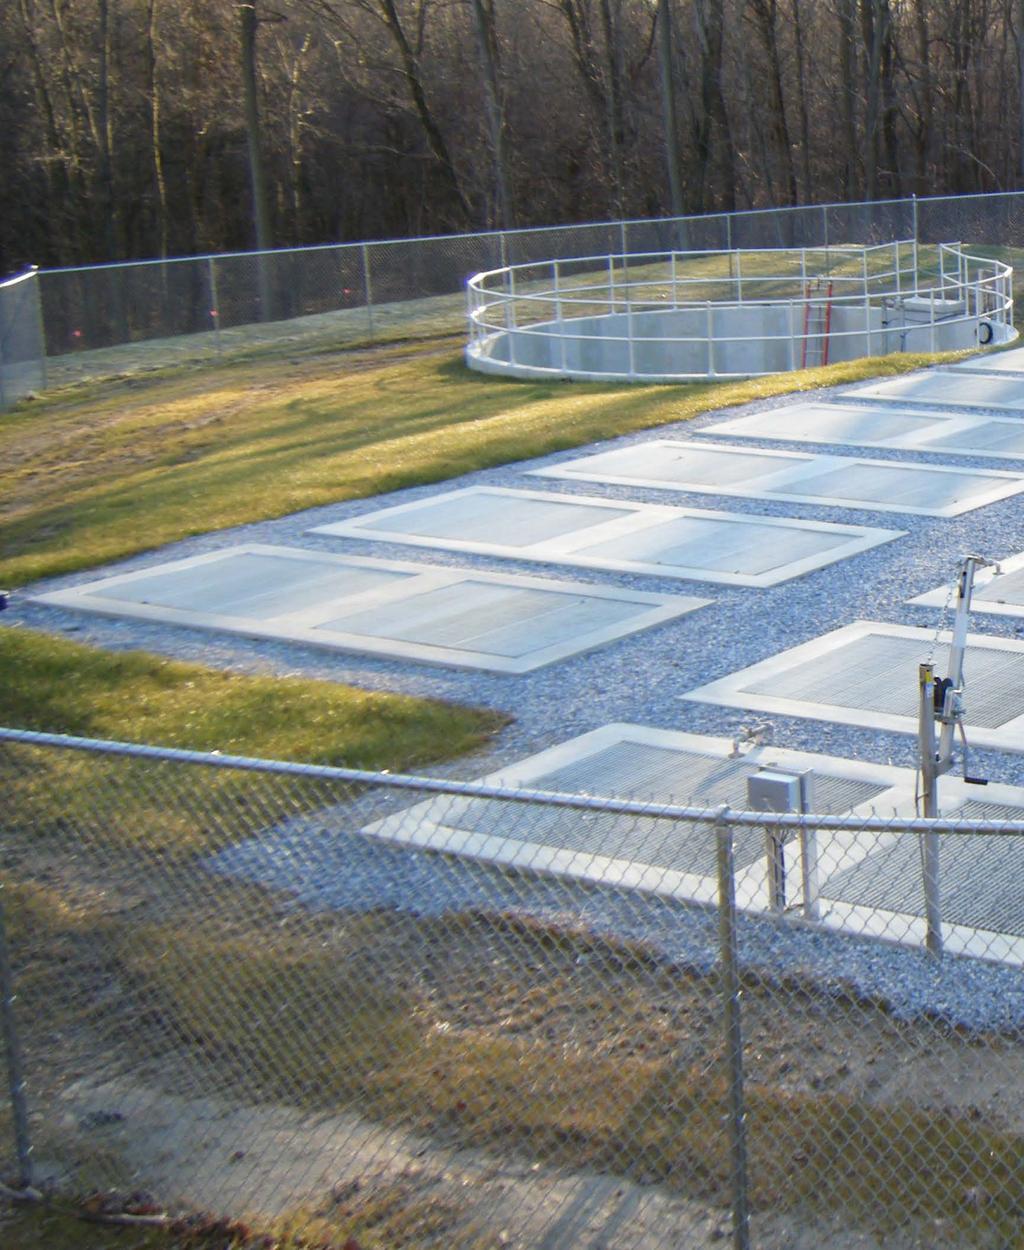 ROSE HILL CASE STUDY Description of the Original Plant: The Rosehill WWTP was constructed in 1990 as an extended aeration process designed to treat standard domestic residential waste.